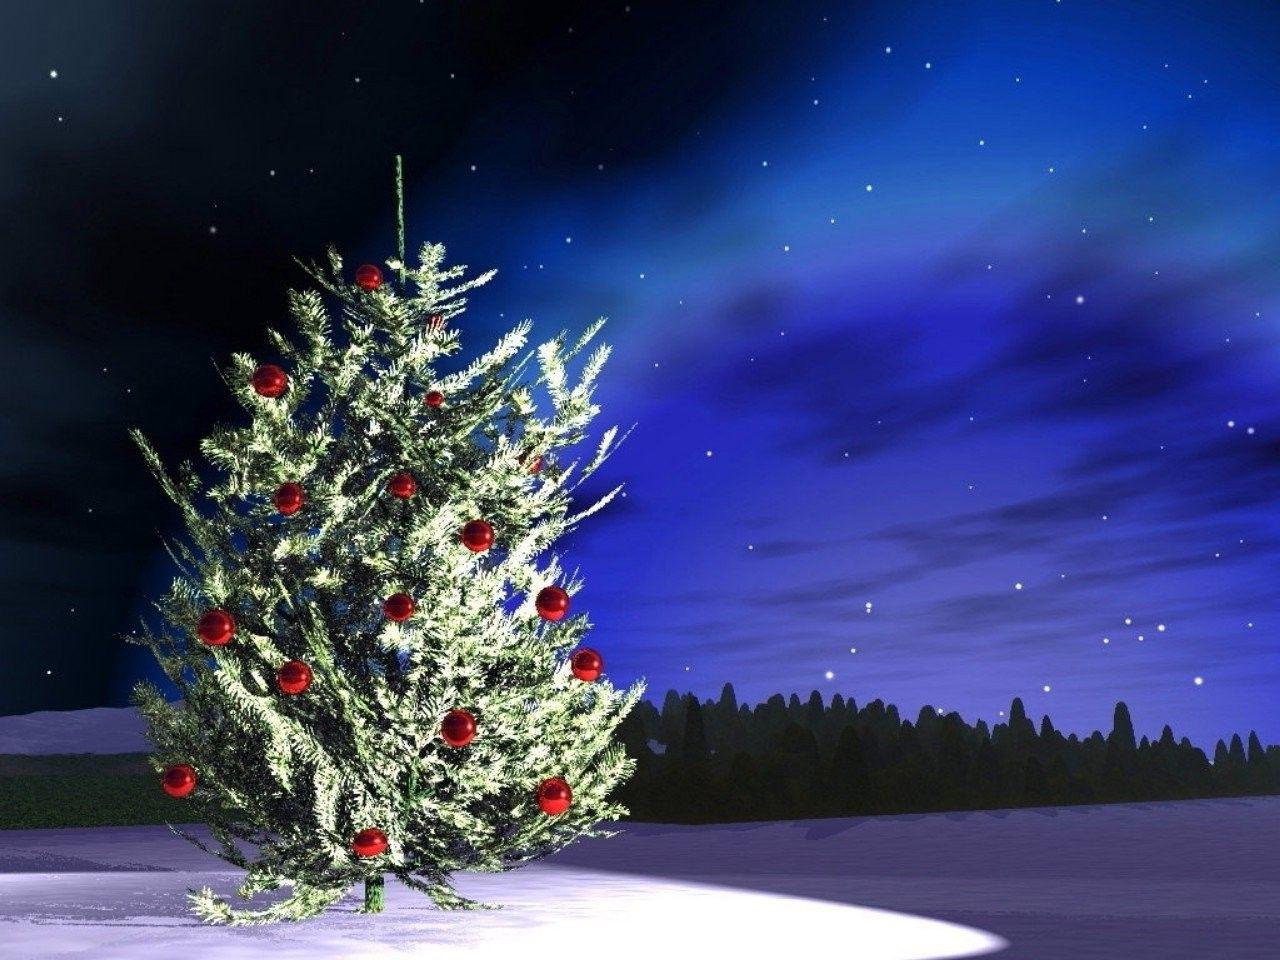 Forests: Night Tree Outdoor Christmas Stars Snow Sky Forest Image